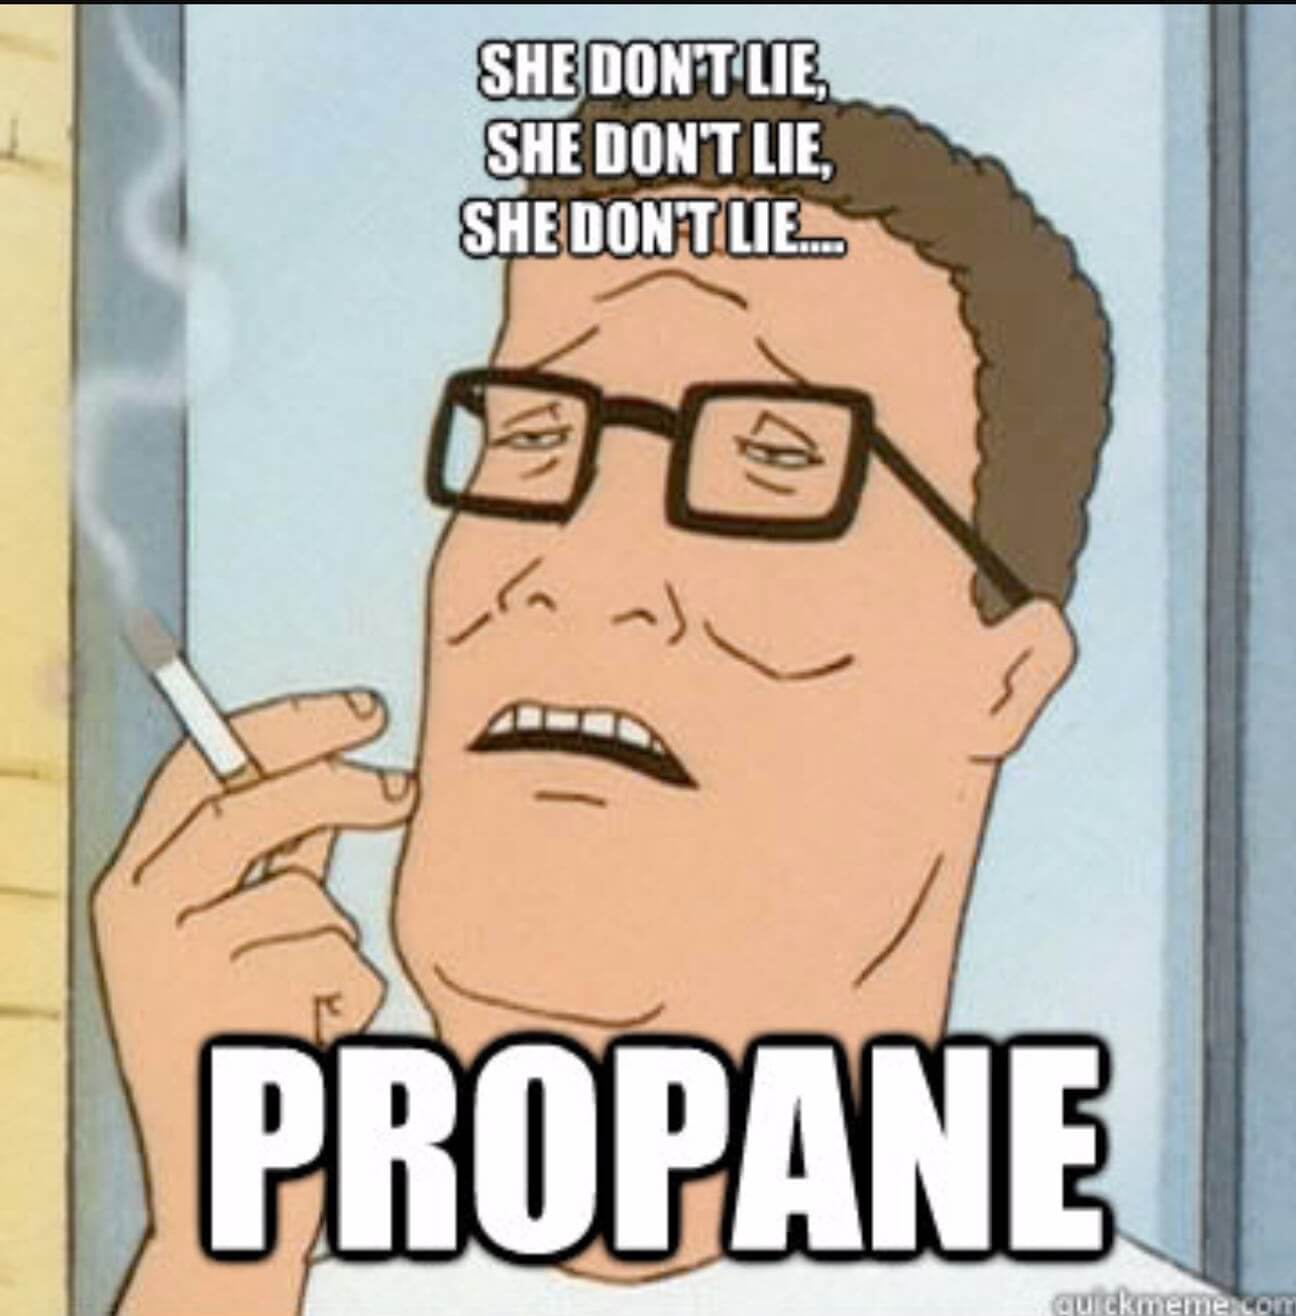 18 King Of The Hill Memes That Prove a TV Show About Propane Can Work